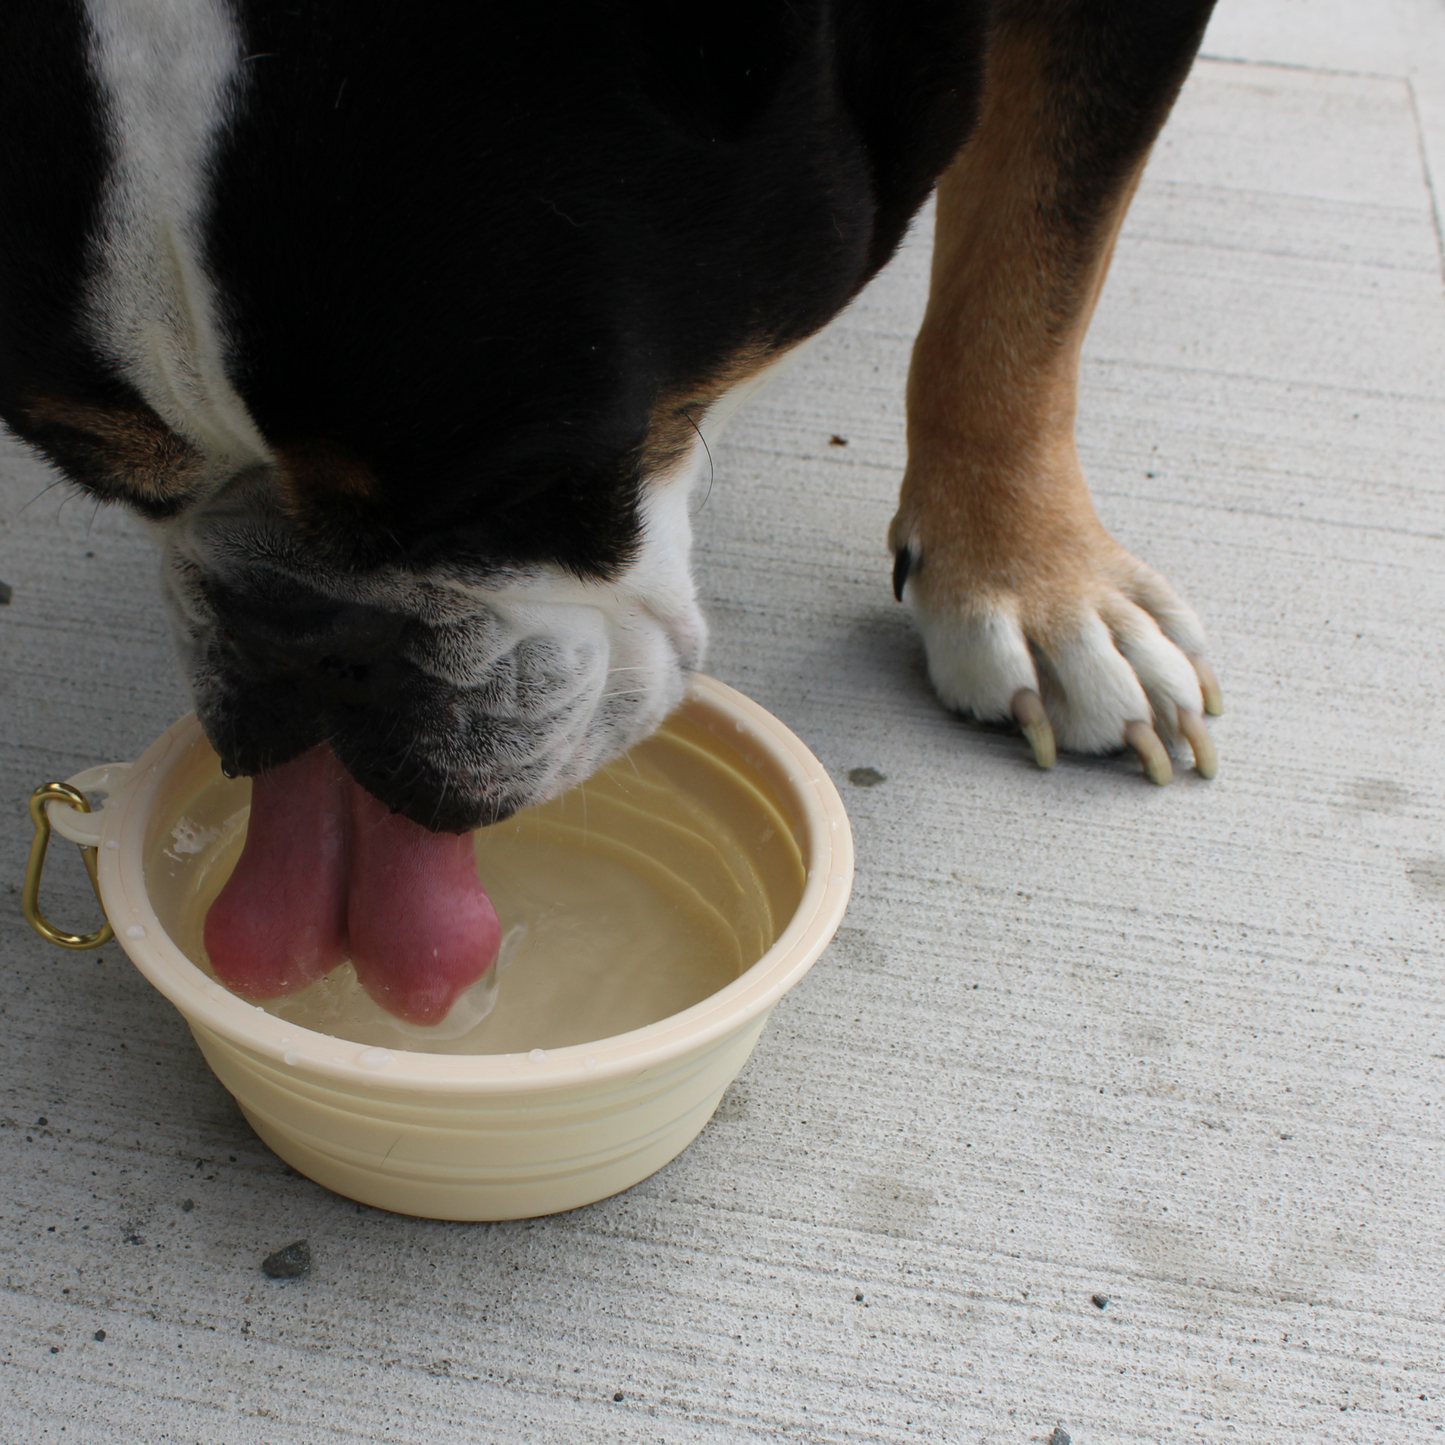 Collapsible Silicone Dog Bowls